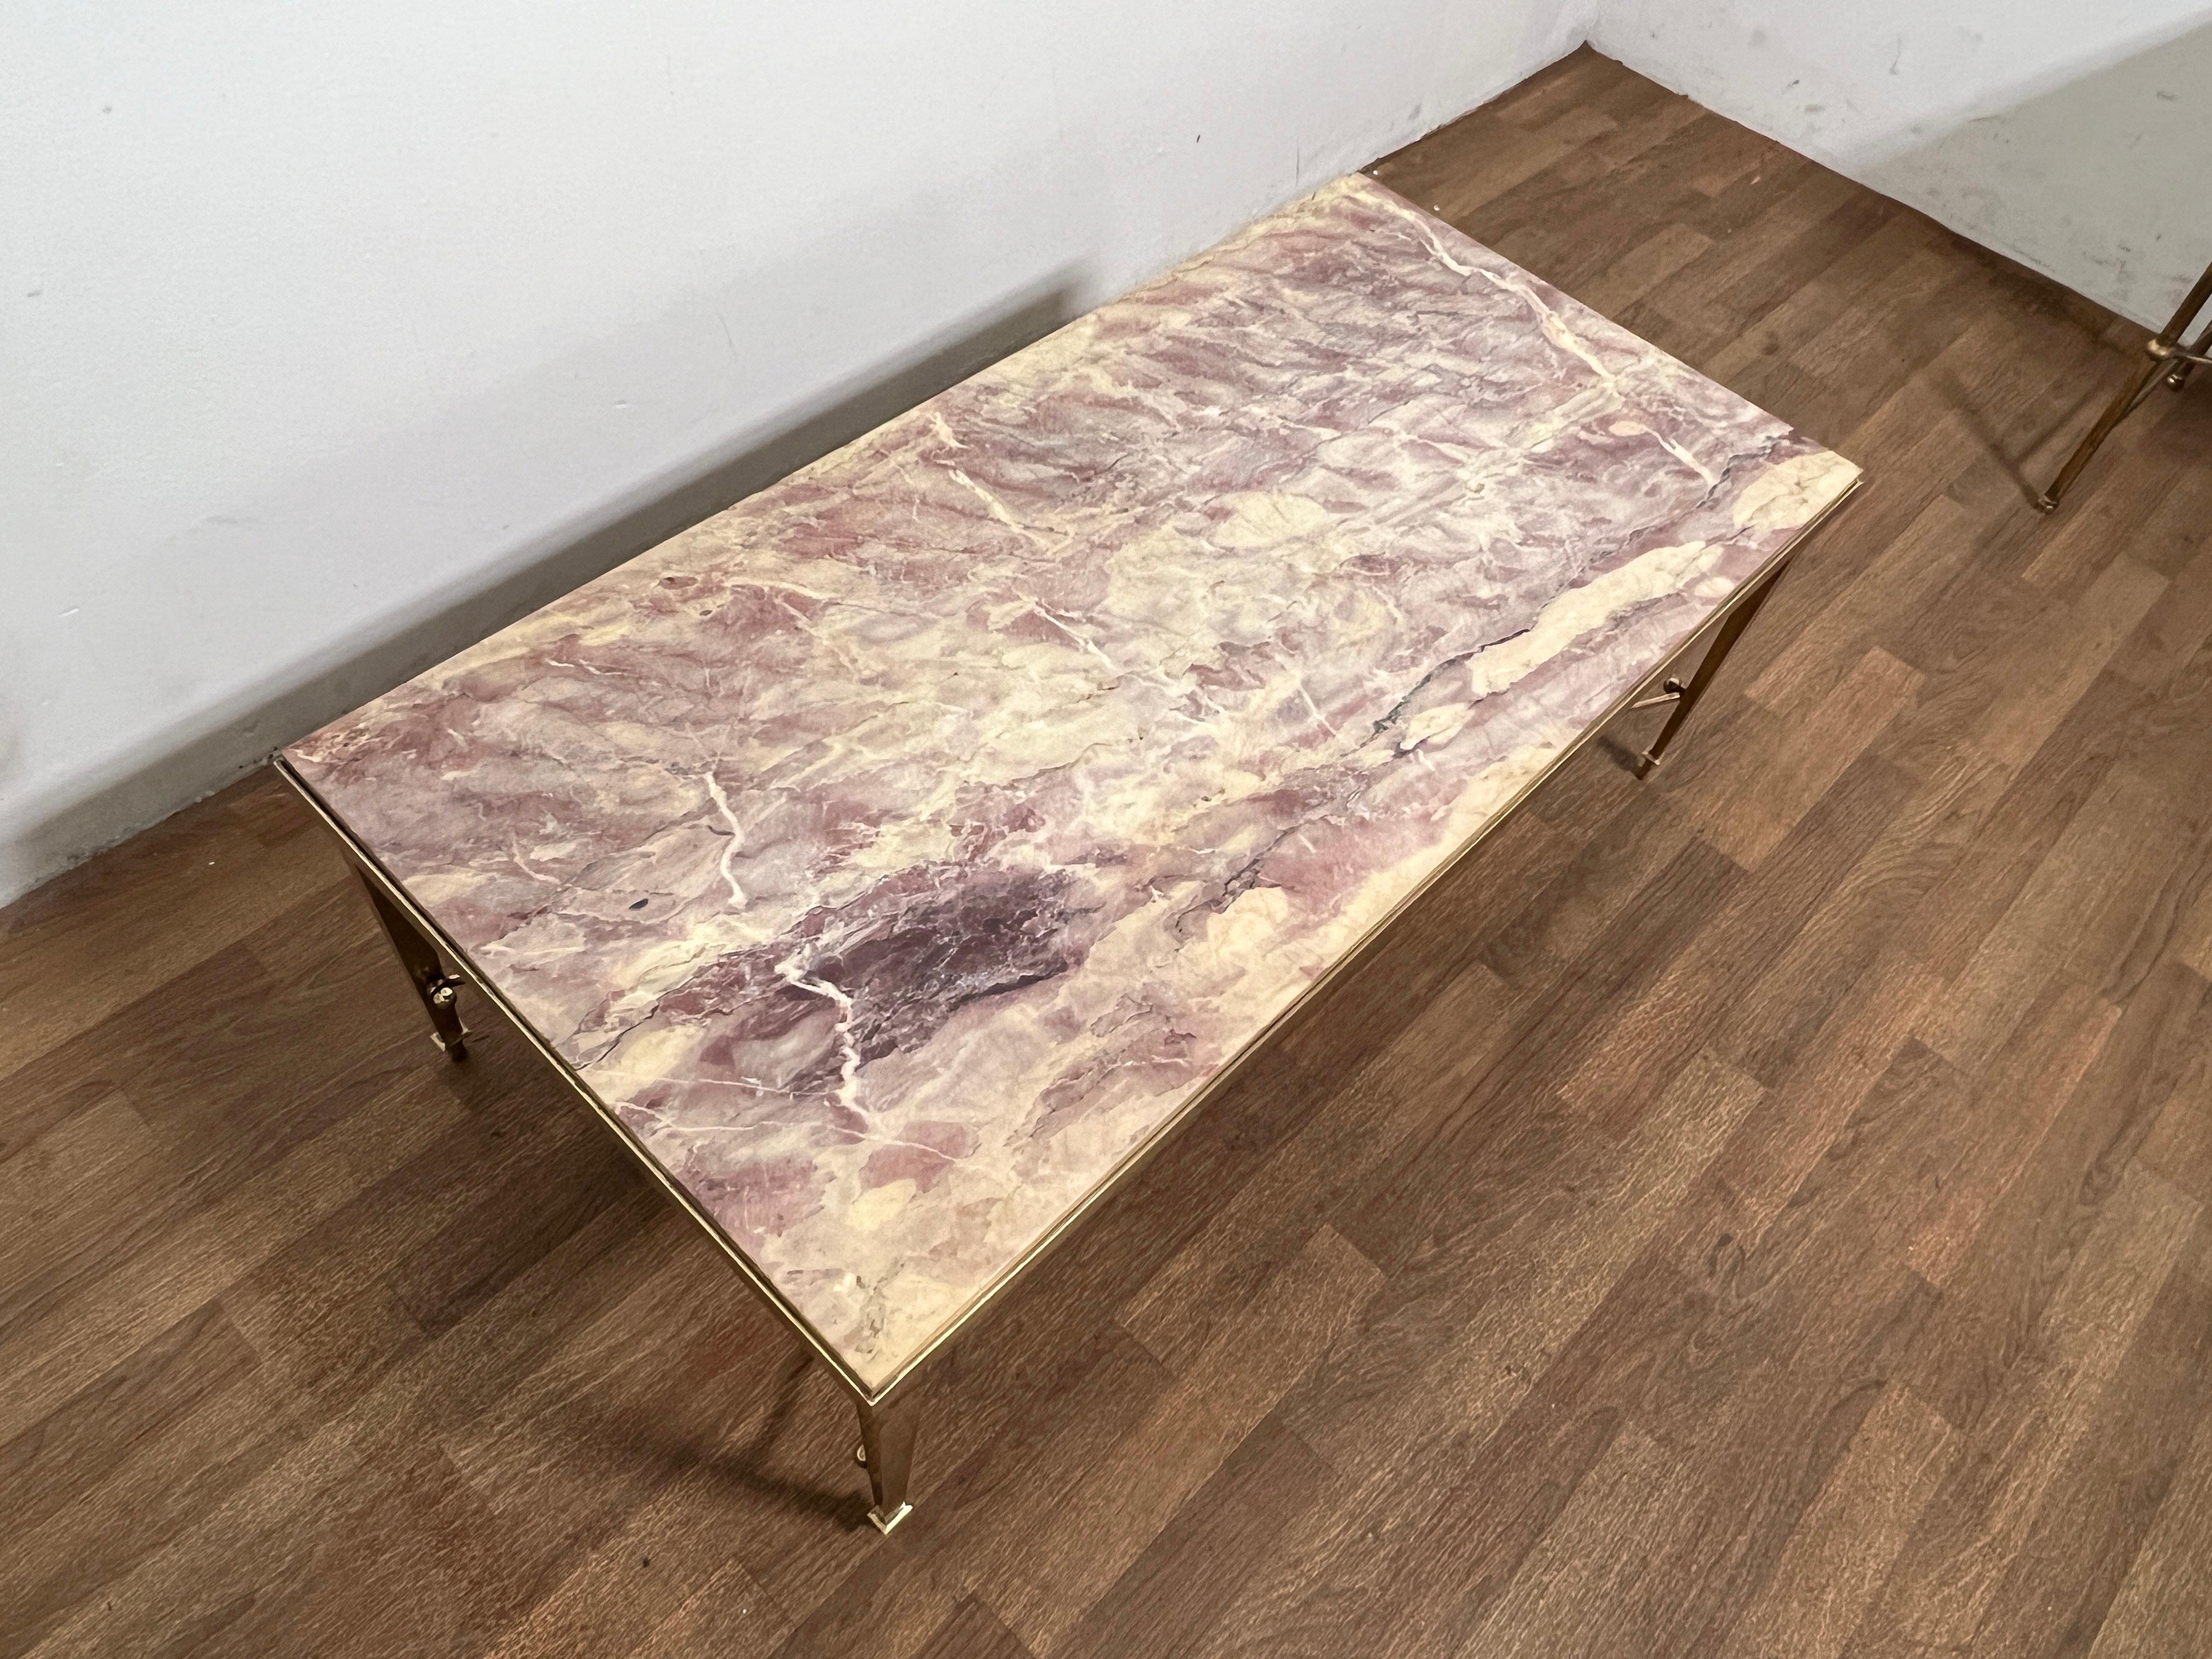 Hollywood Regency Maison Jansen Solid Brass Coffee Table With Lavender Marble Top, C. 1950s For Sale